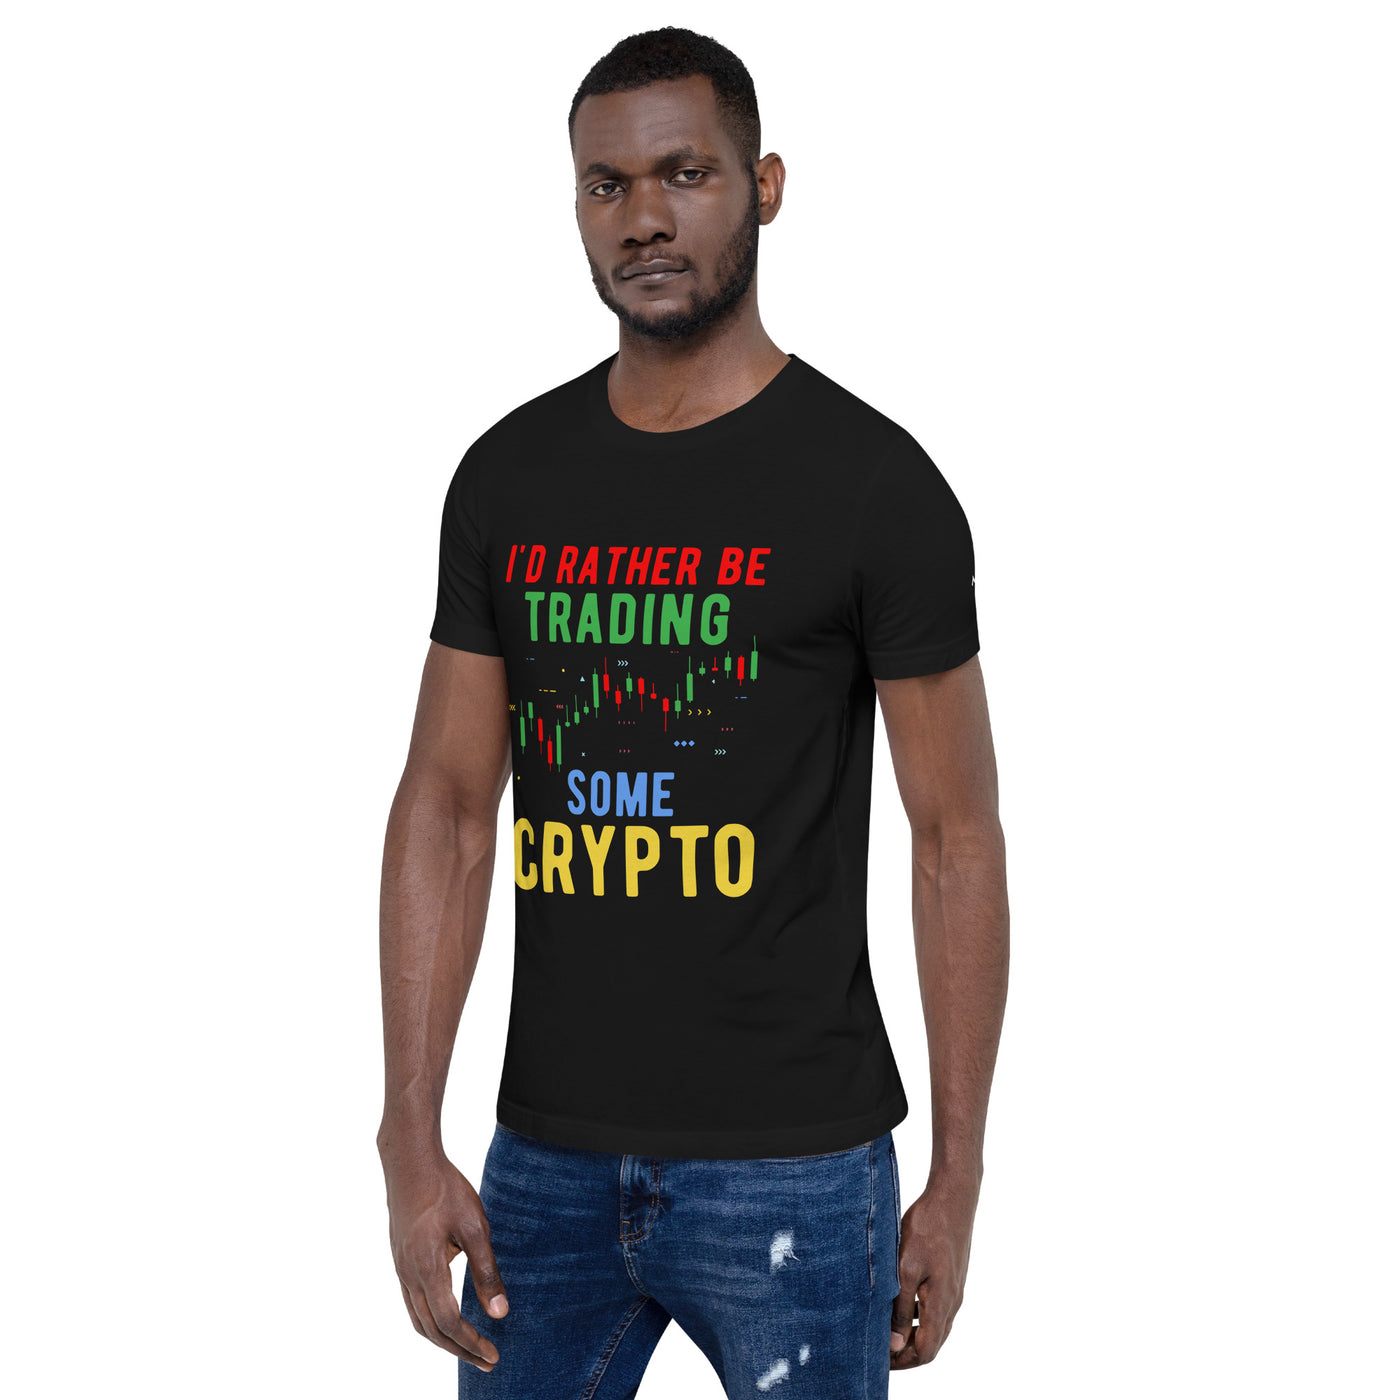 I'd rather be trading some Crypto - Unisex t-shirt